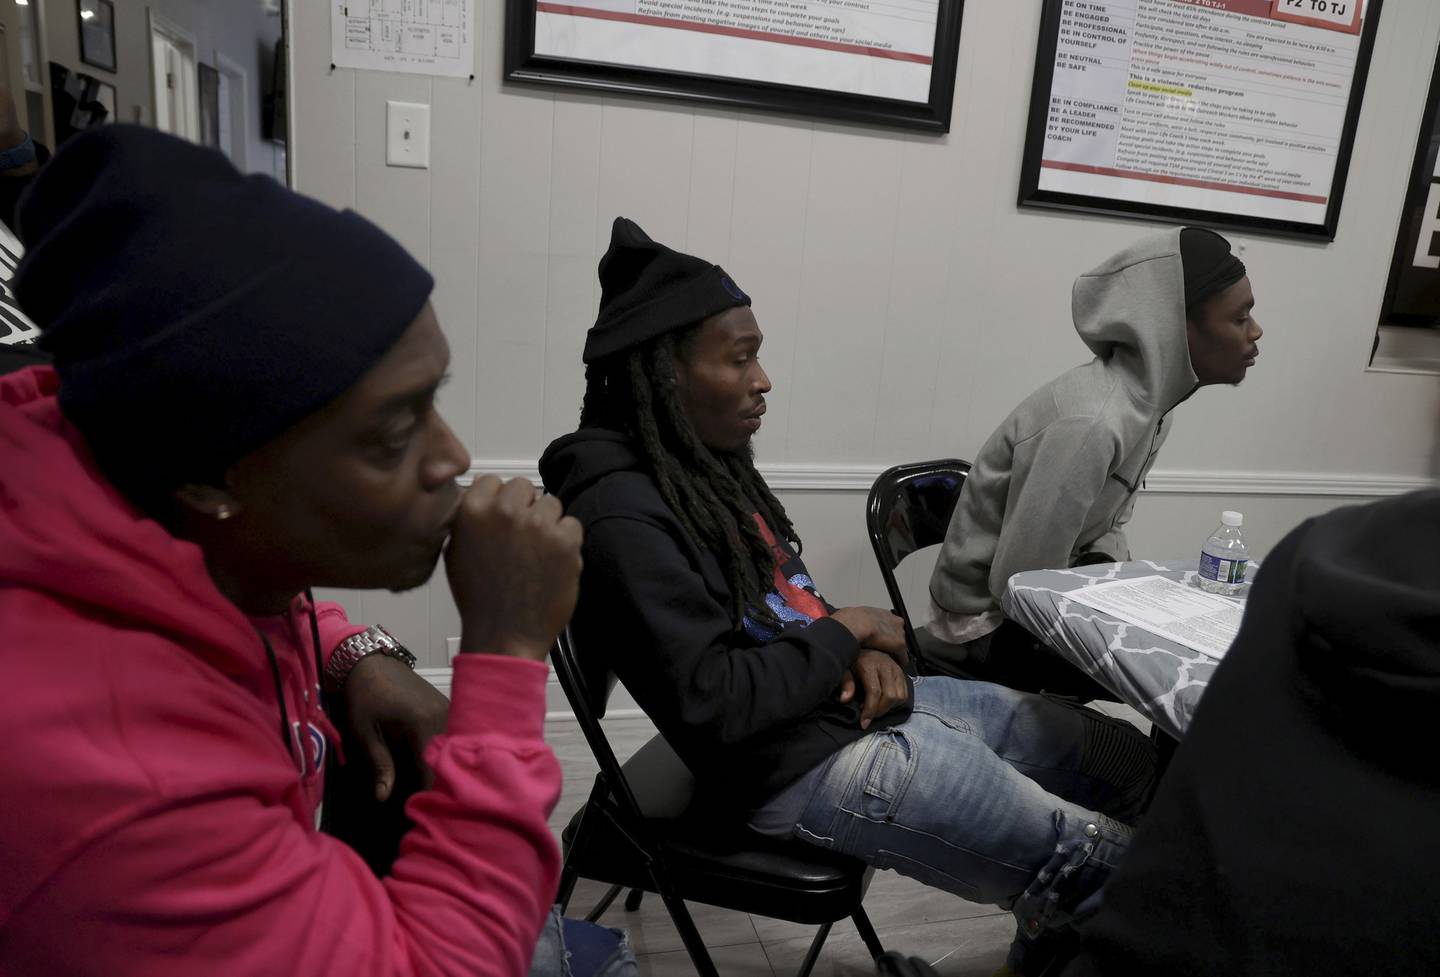 Outreach Specialist Cedric Hawkins, left, and new students Duane Taylor, center, and Perry Berry, right, listen during orientation at Youth Peace Center where Blackmon works as a mentor Nov. 17, 2022.